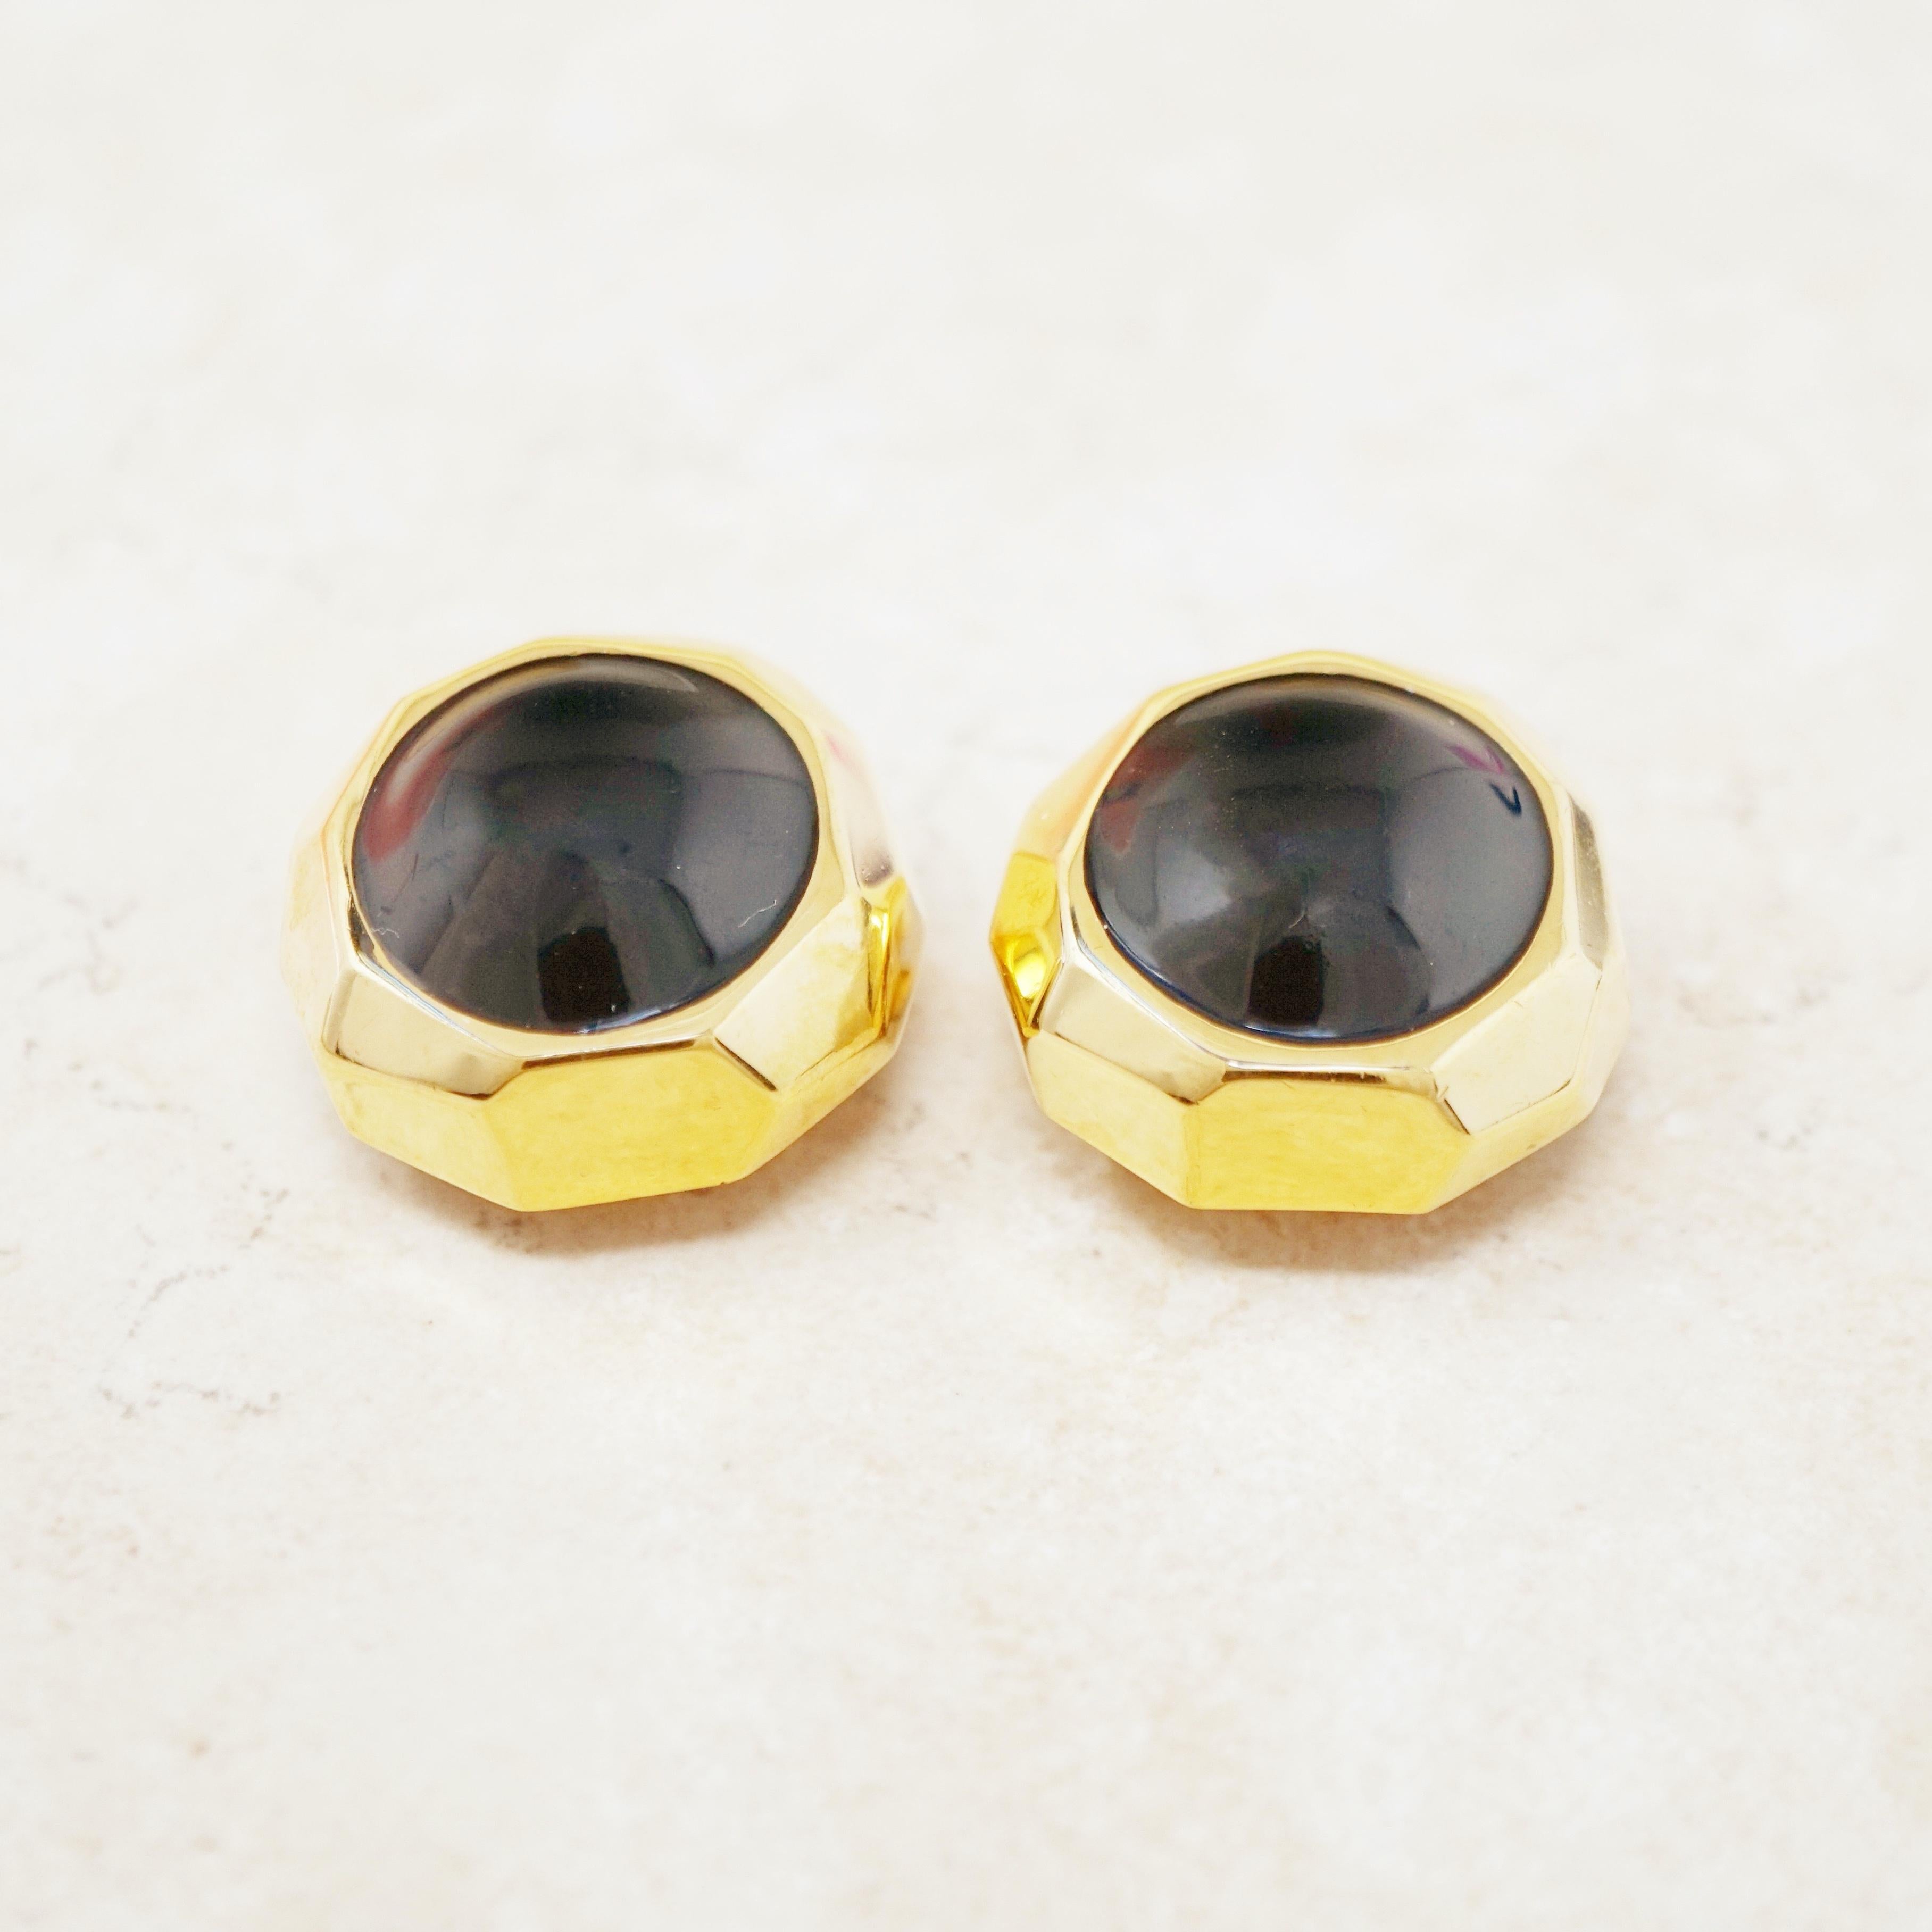 Modern Faceted Gilt & Onyx Cabochon Button Statement Earrings by St. John, 1980s For Sale